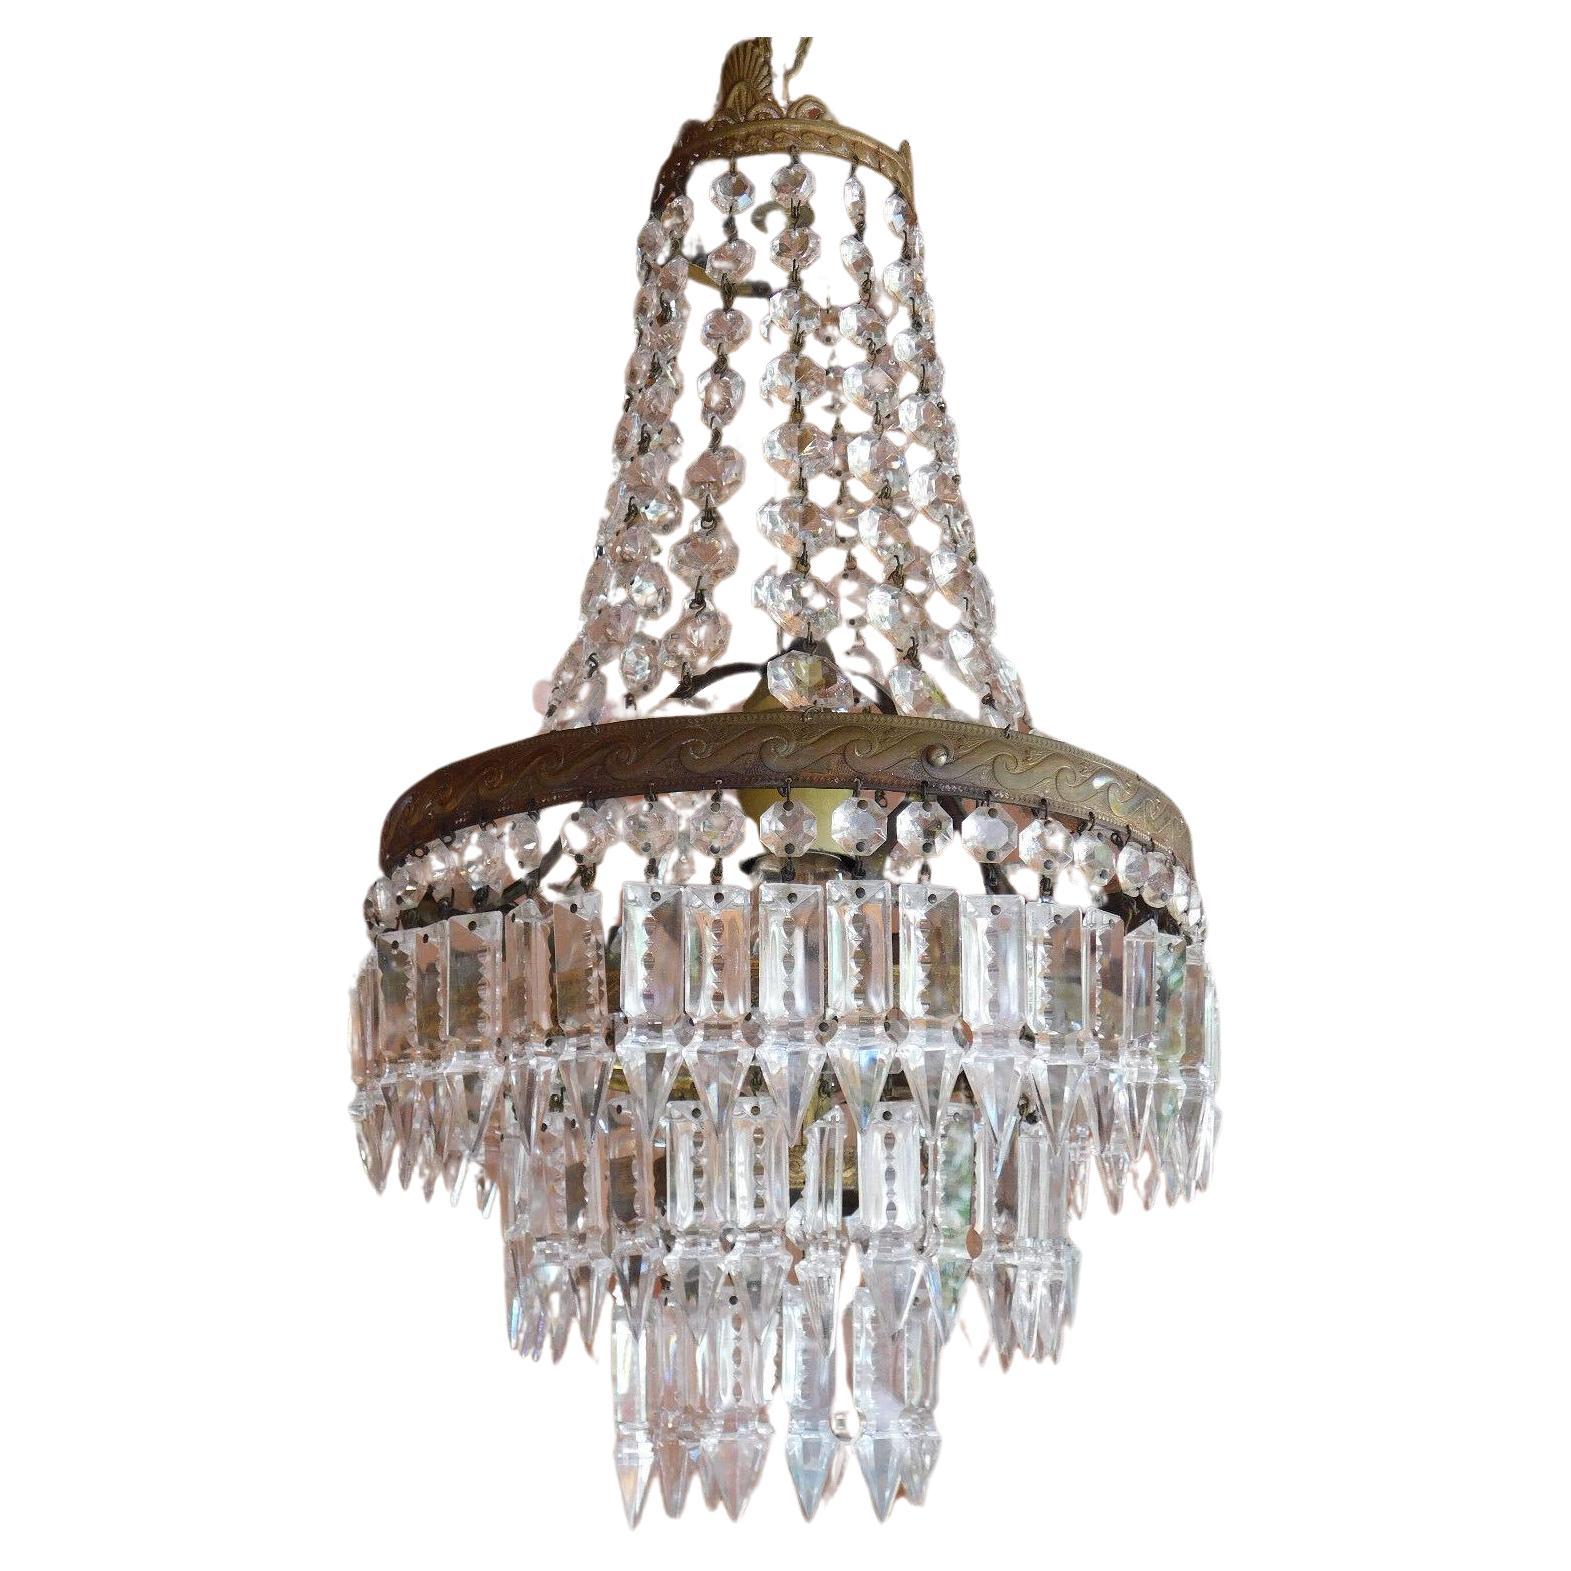 19thc Antique French Empire style Bronze & Cut Crystal Cascading Chandelier For Sale